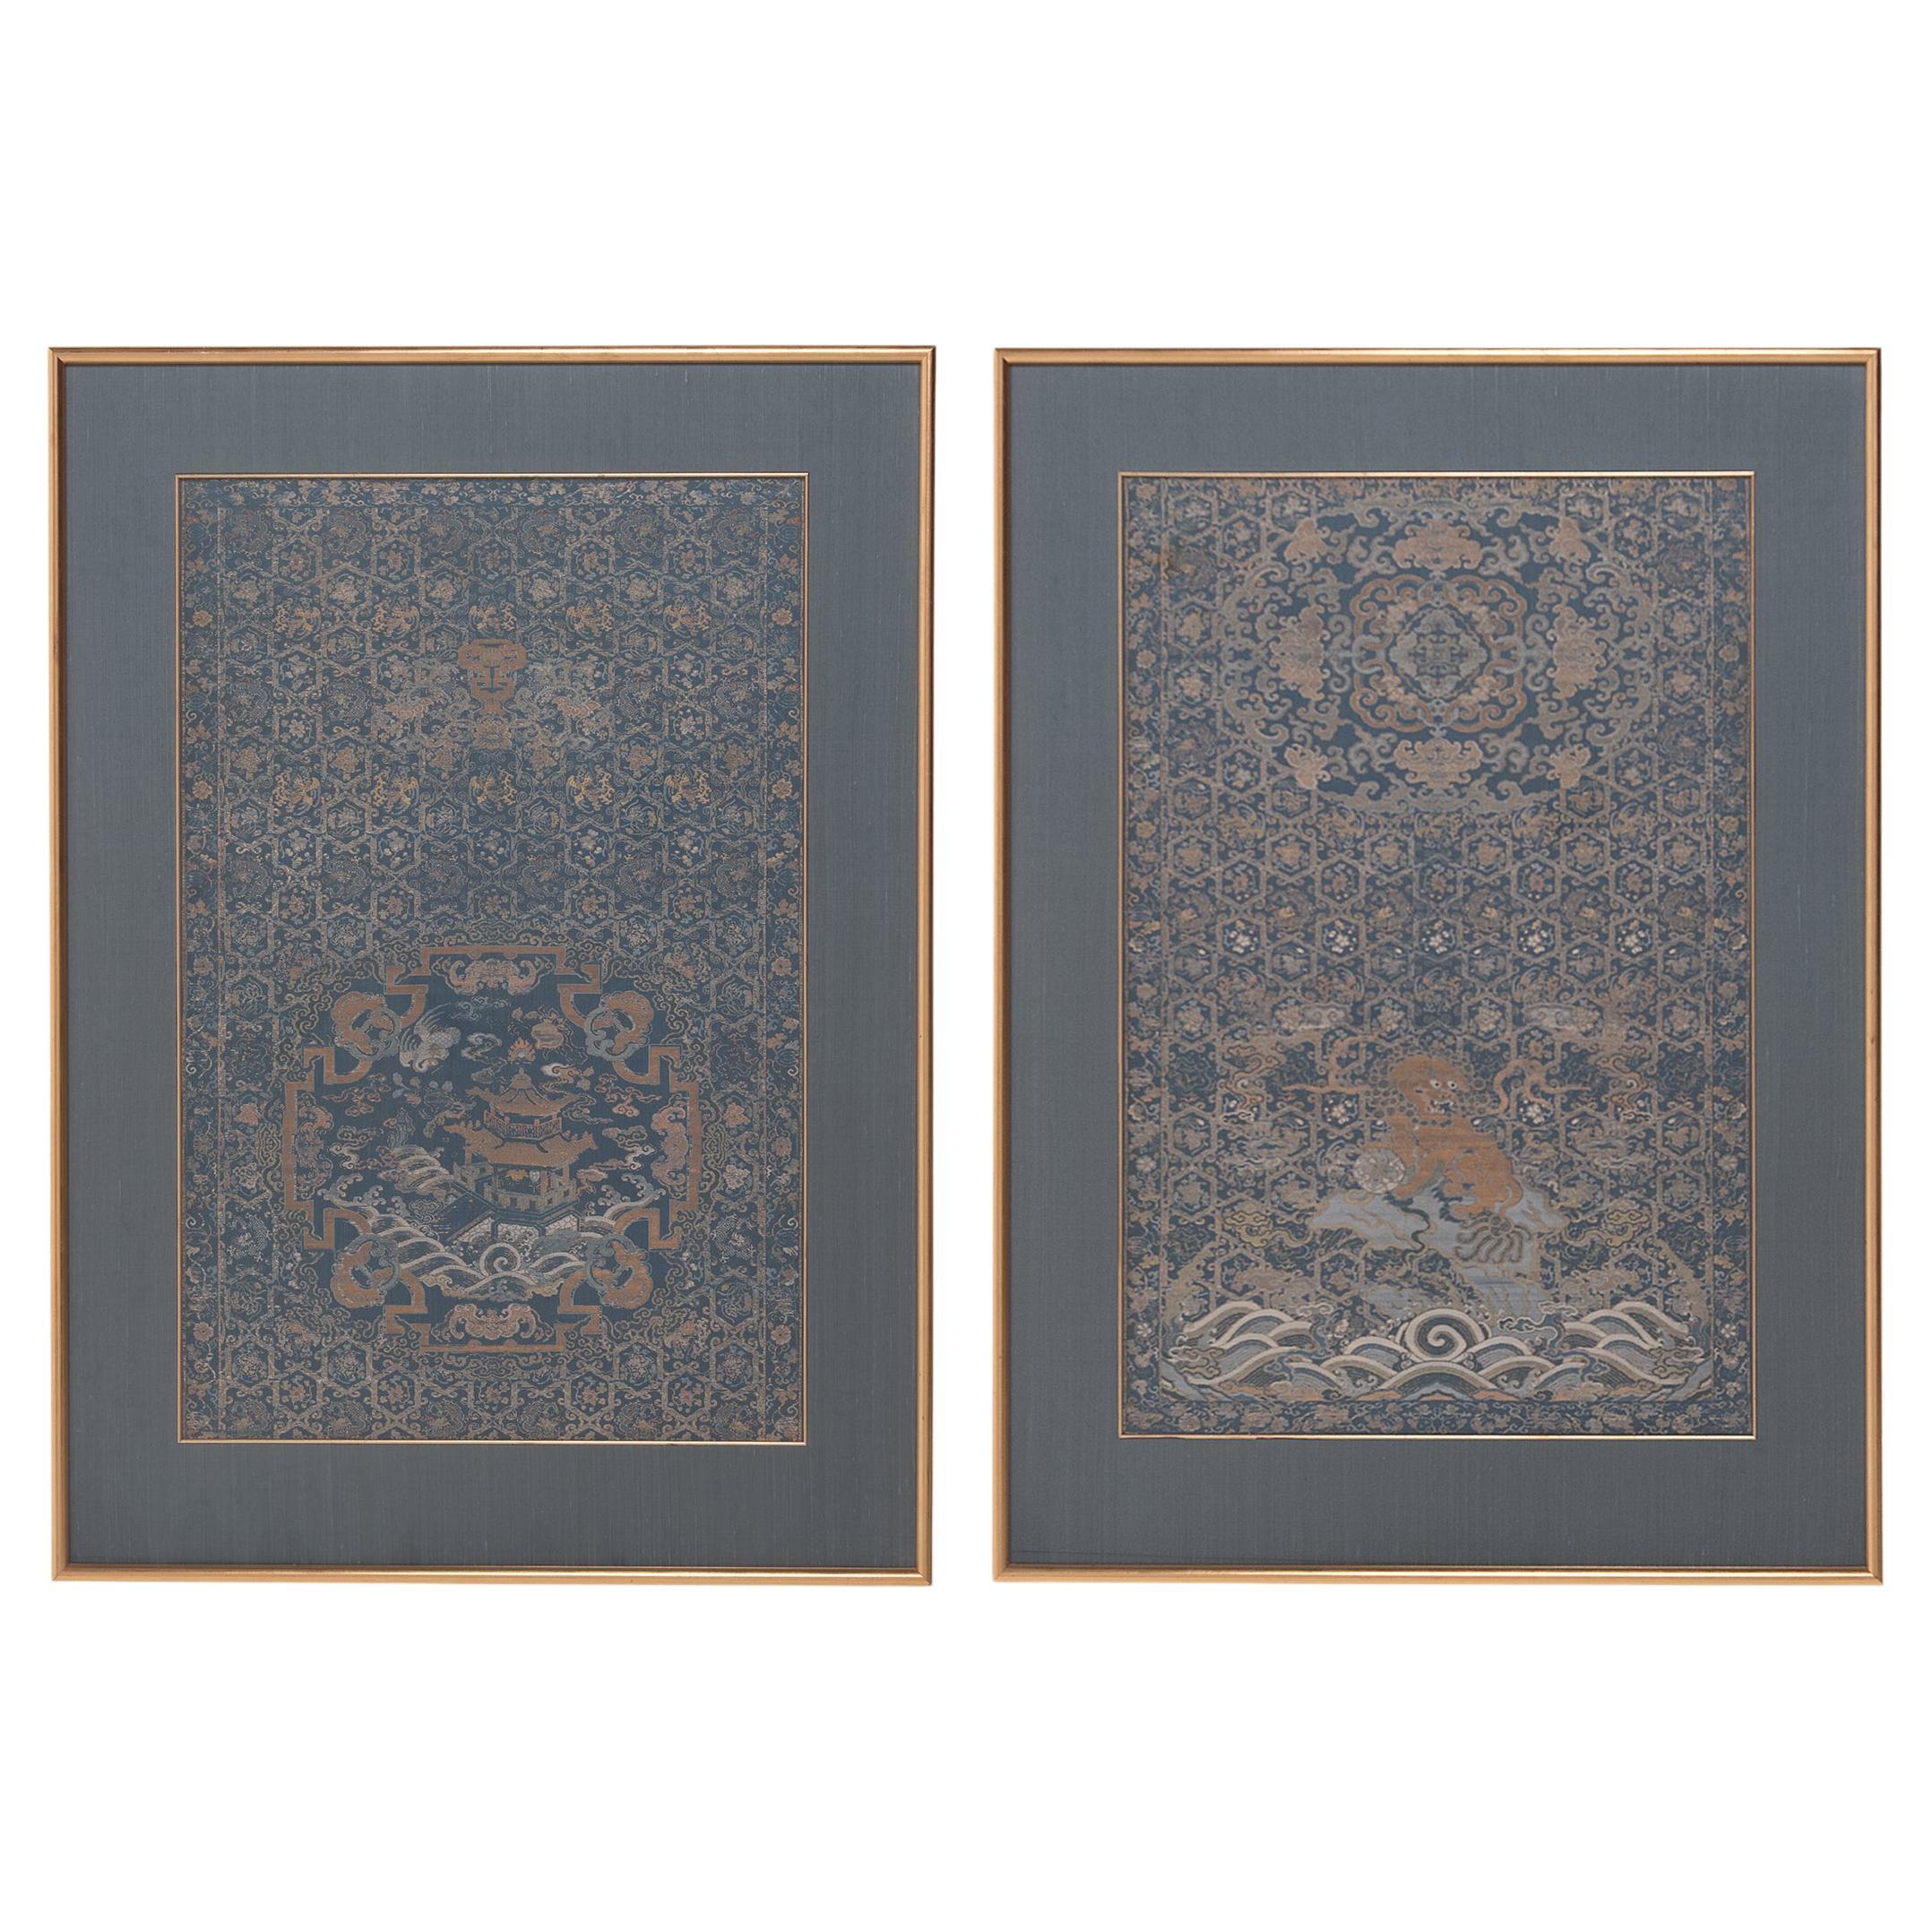 Pair of Framed Chinese Silk Brocade Chair Panels, c. 1850